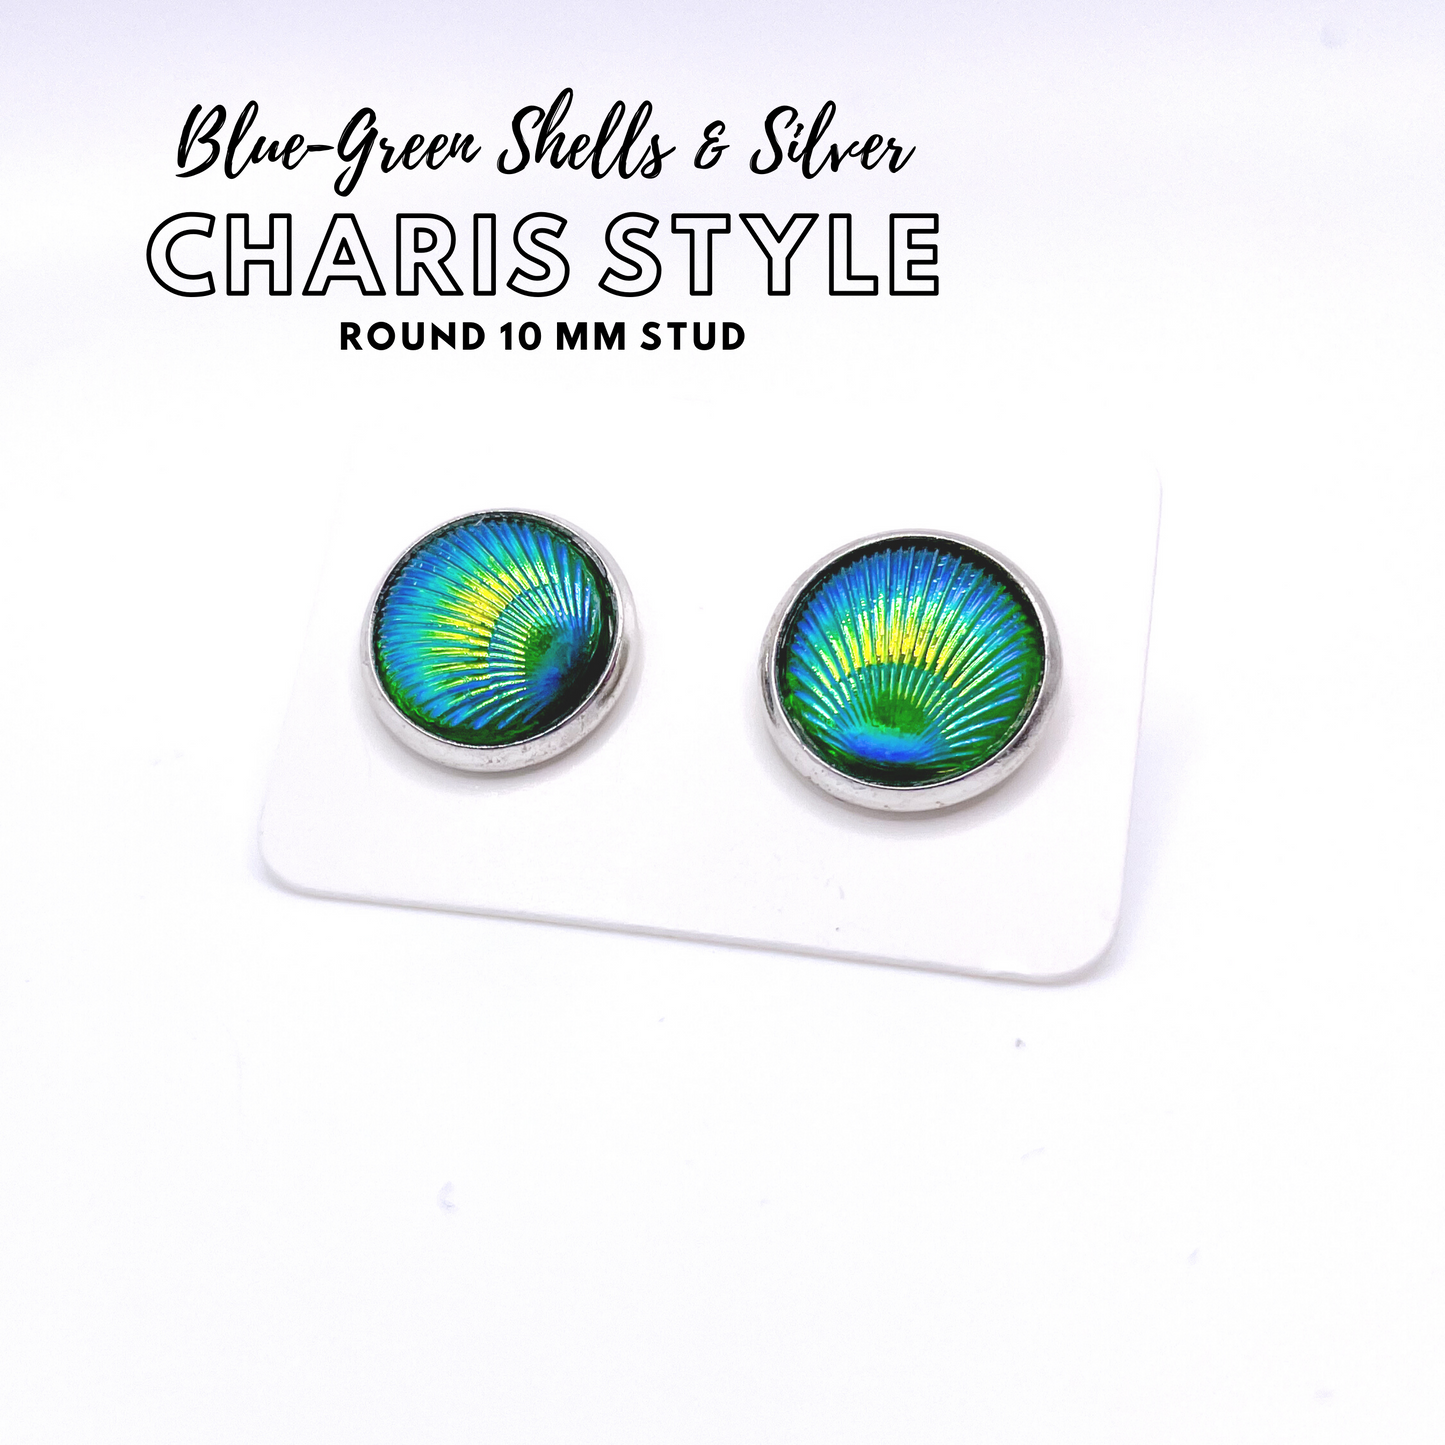 Charis Style - 10 MM Studs - Blue-Green Mermaid Shells and Silver